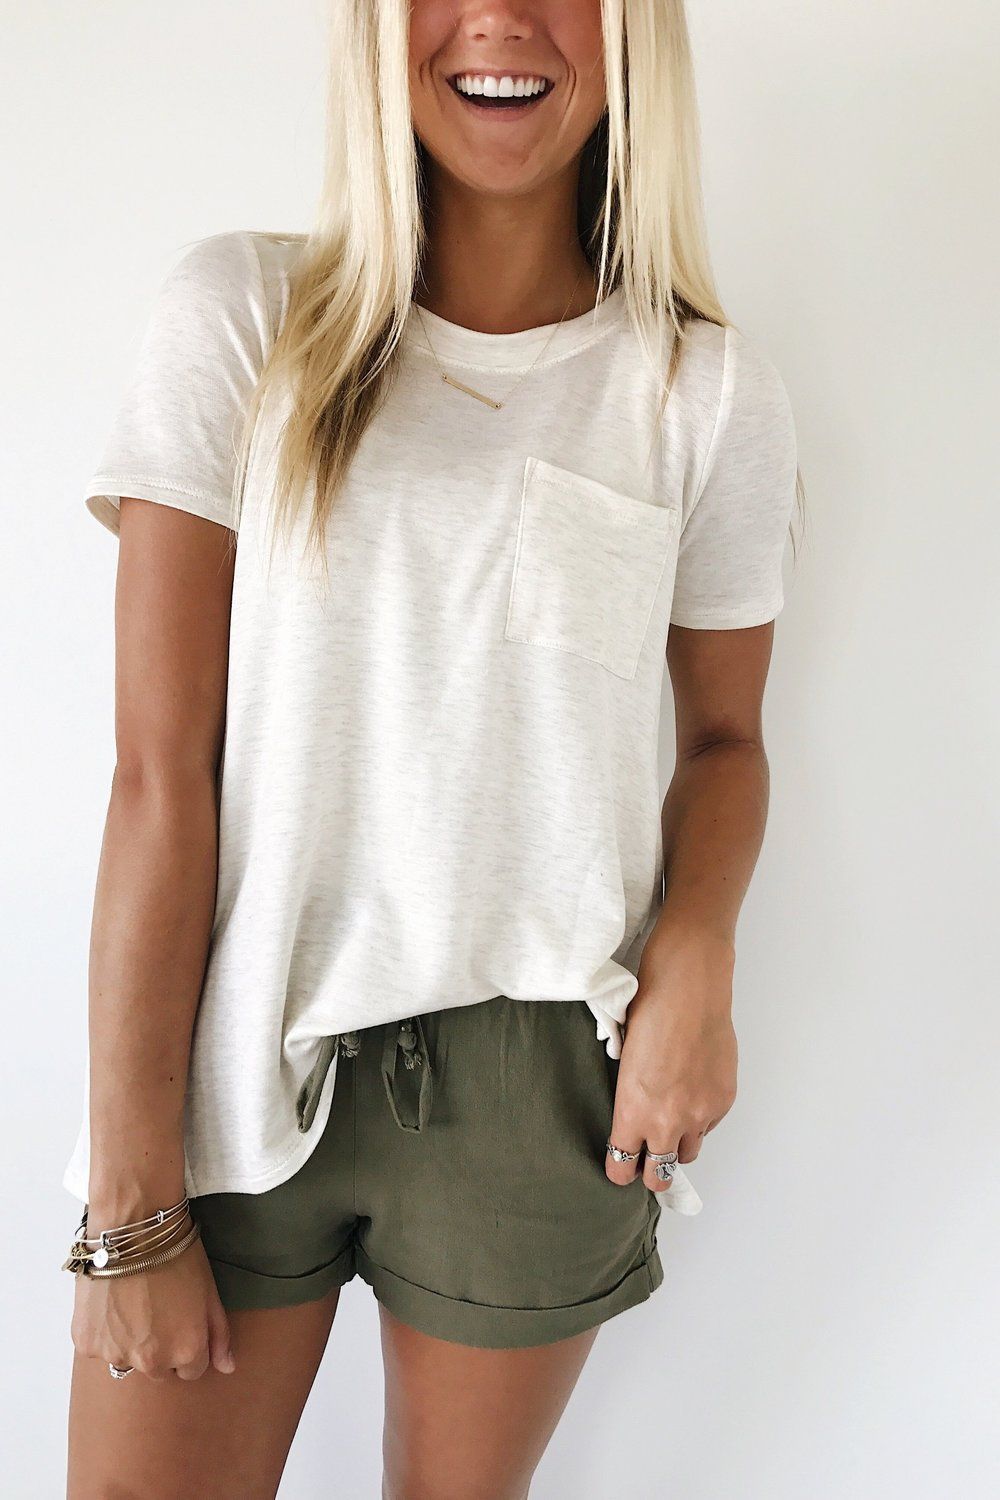 Oatmeal Heathered Top  Front Pocket  Mini Side Slits  Loose Fit  Also available in Heather Blue